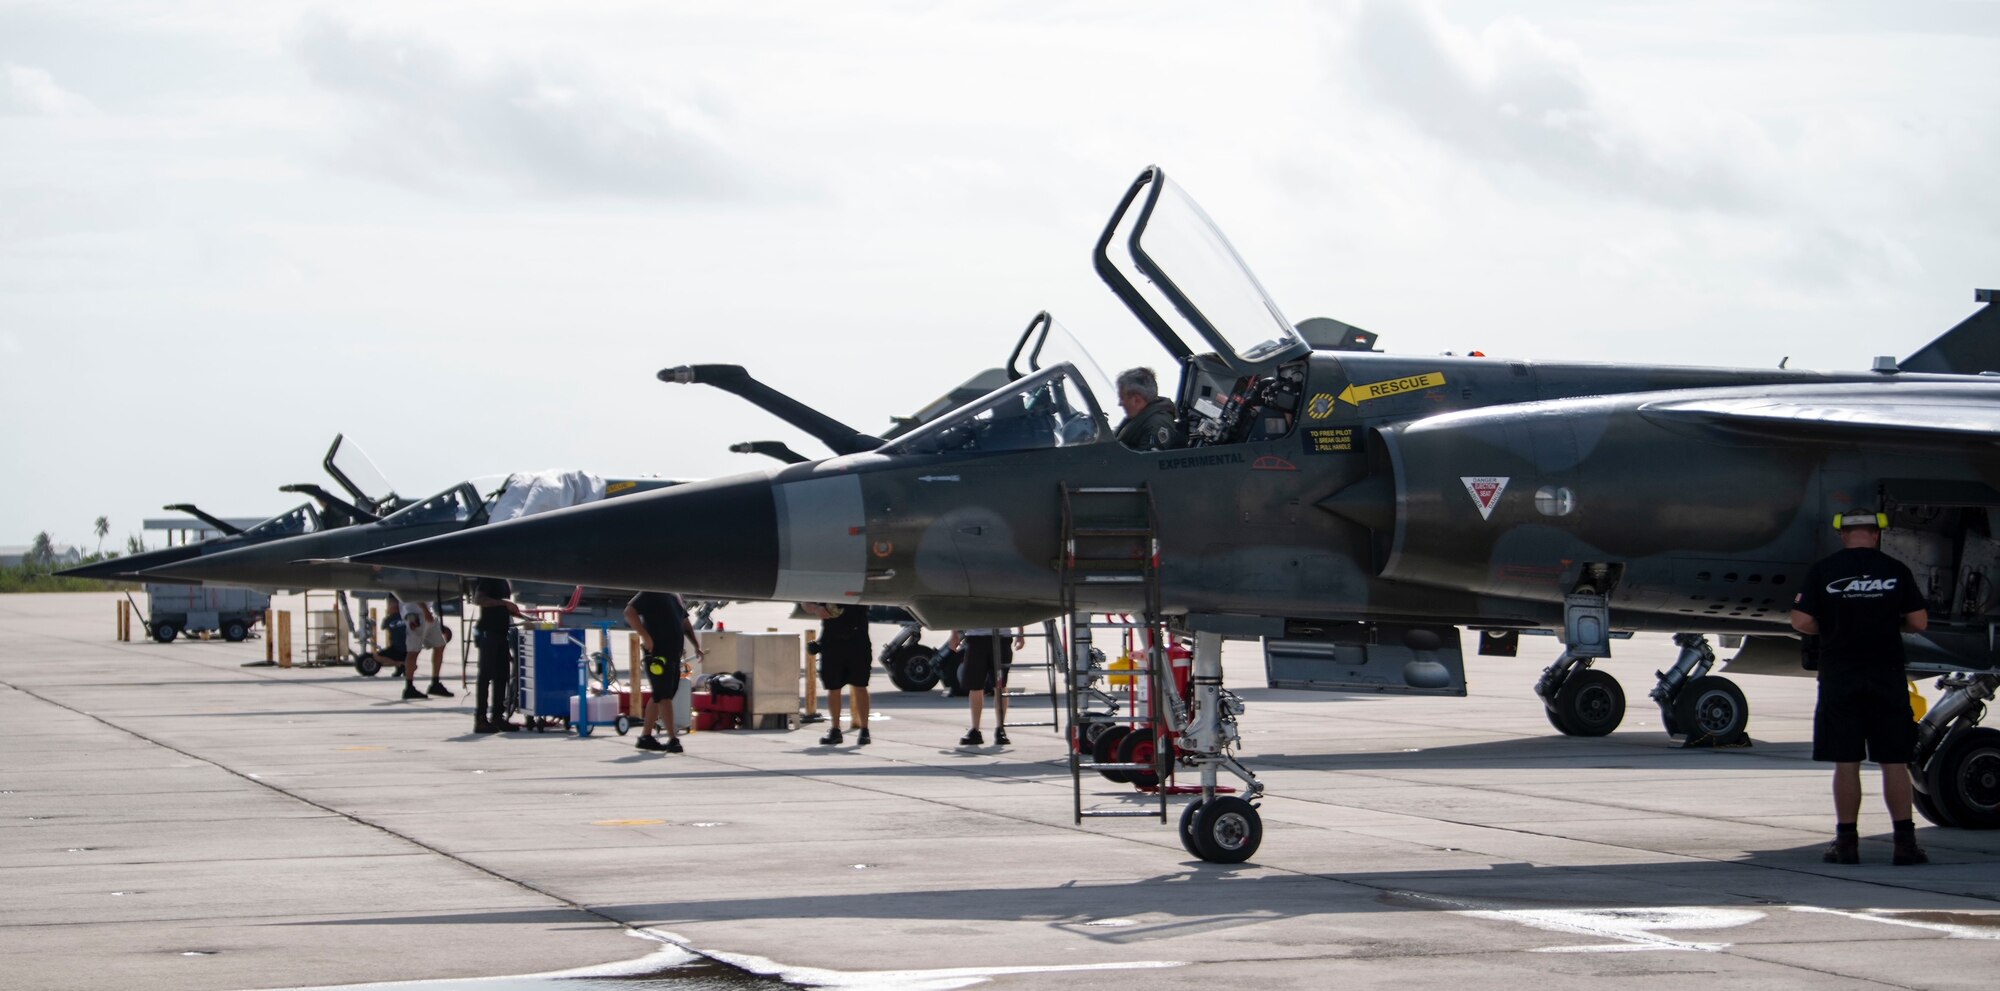 F-1 Mirages from Tyndall Air Force Base, Florida, undergo preflight checks at Naval Air Station Key West, Florida, July 13, 2021. The Airborne Tactical Advantage Company sent their assets to NAS Key West in support of the 43rd Fighter Squadron’s capstone event where the squadron’s student pilots practiced dissimilar combat air training. (U.S. Air Force photo by Brad Sturk)